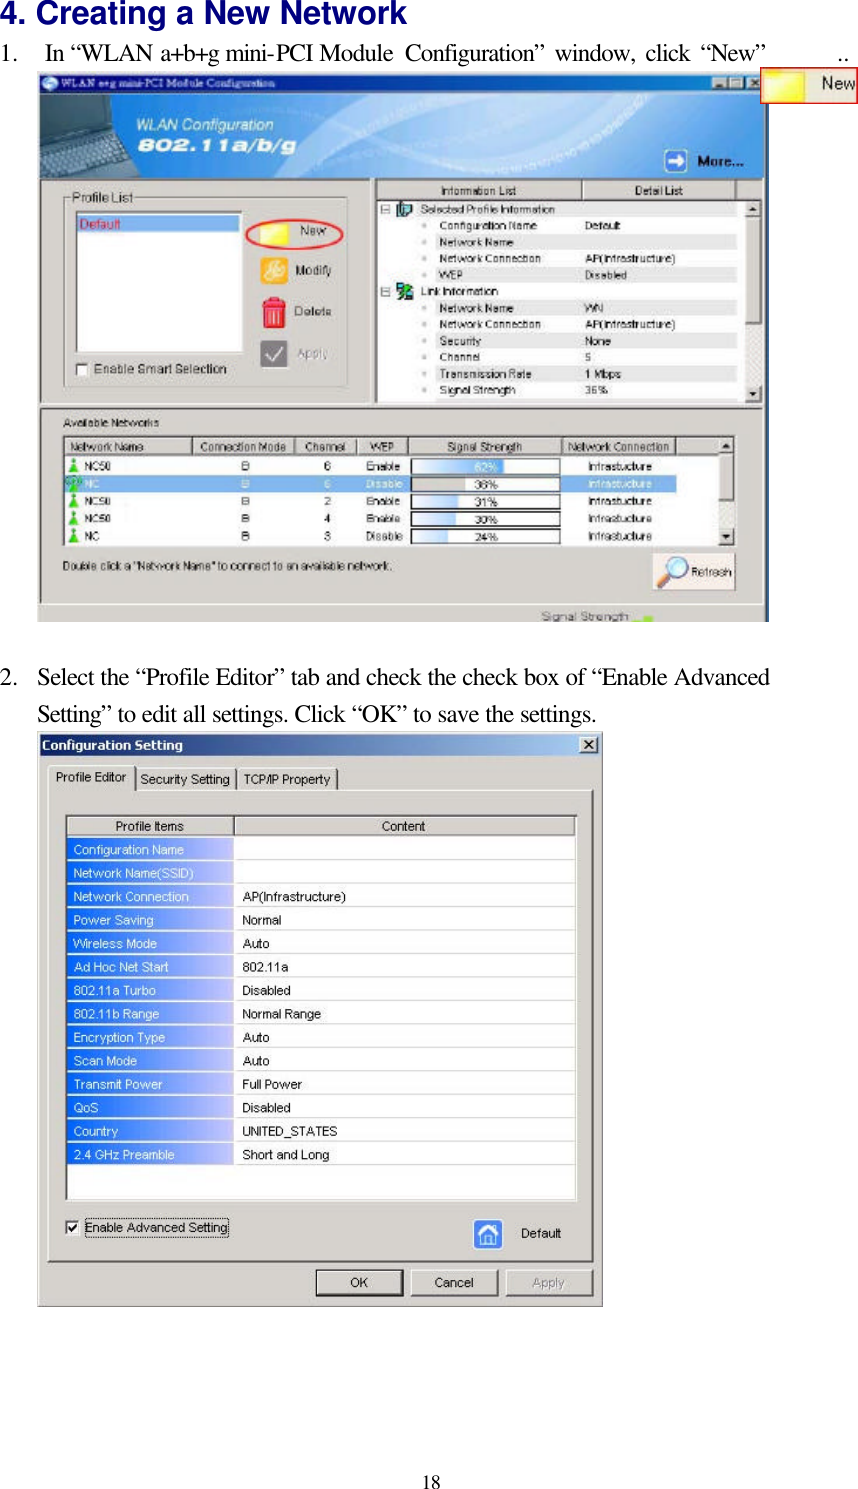  18 4. Creating a New Network 1.  In “WLAN a+b+g mini-PCI Module Configuration” window, click “New”       ..   2.  Select the “Profile Editor” tab and check the check box of “Enable Advanced Setting” to edit all settings. Click “OK” to save the settings.  